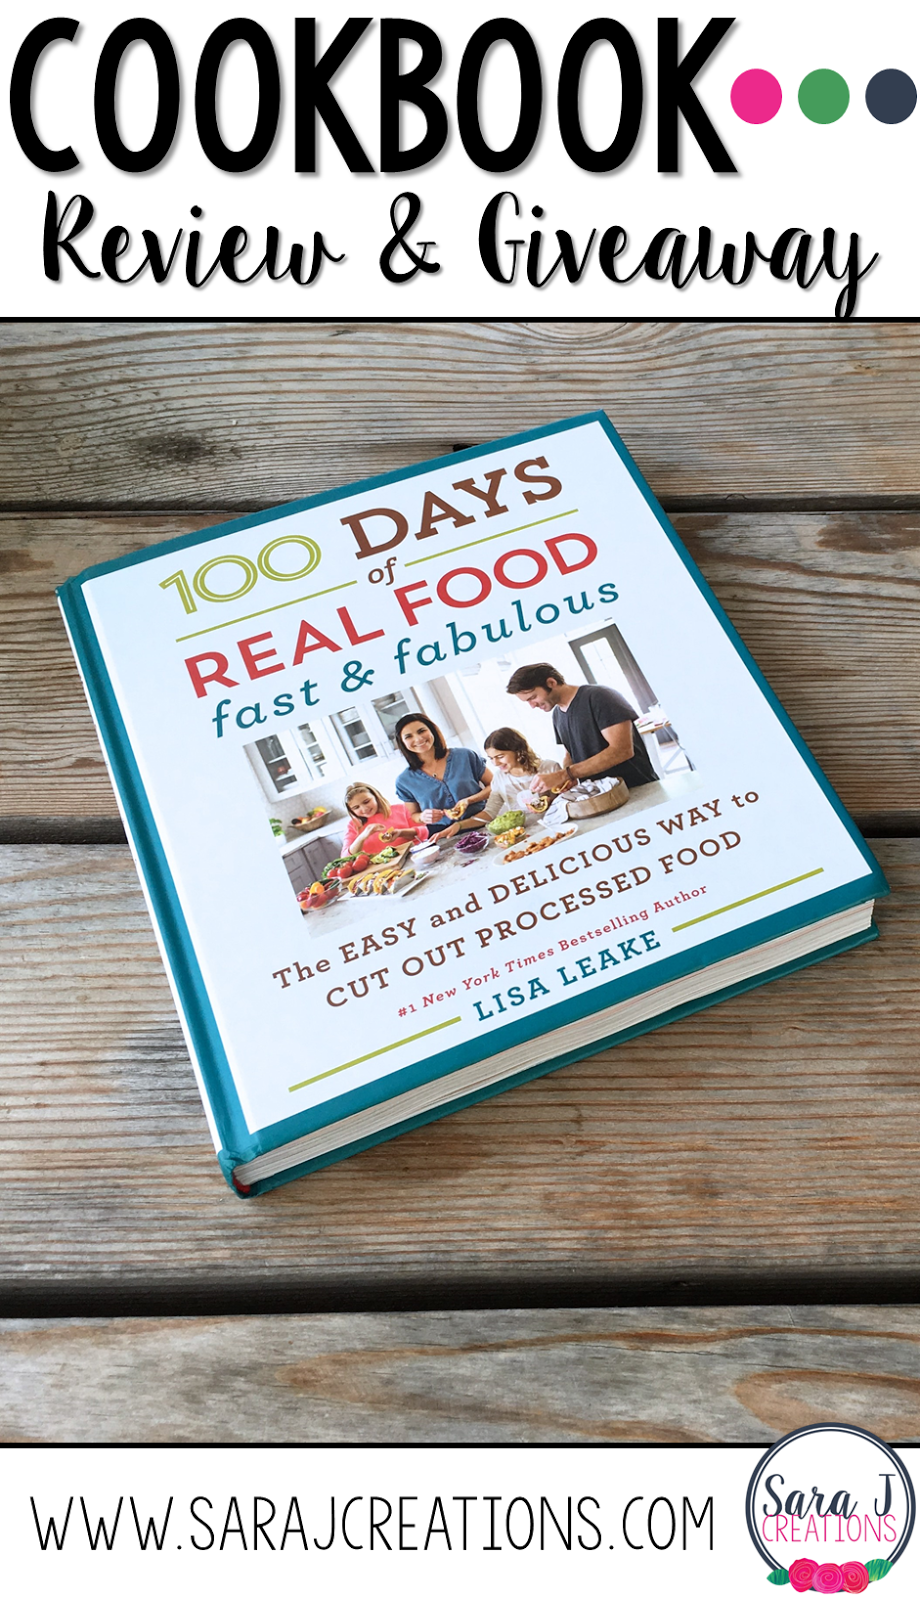 100 Days of Real Food Fast & Fabulous review and giveaway. So many great and fast recipes for breakfast, lunch, dinner and snacks all made with real food and nothing processed.